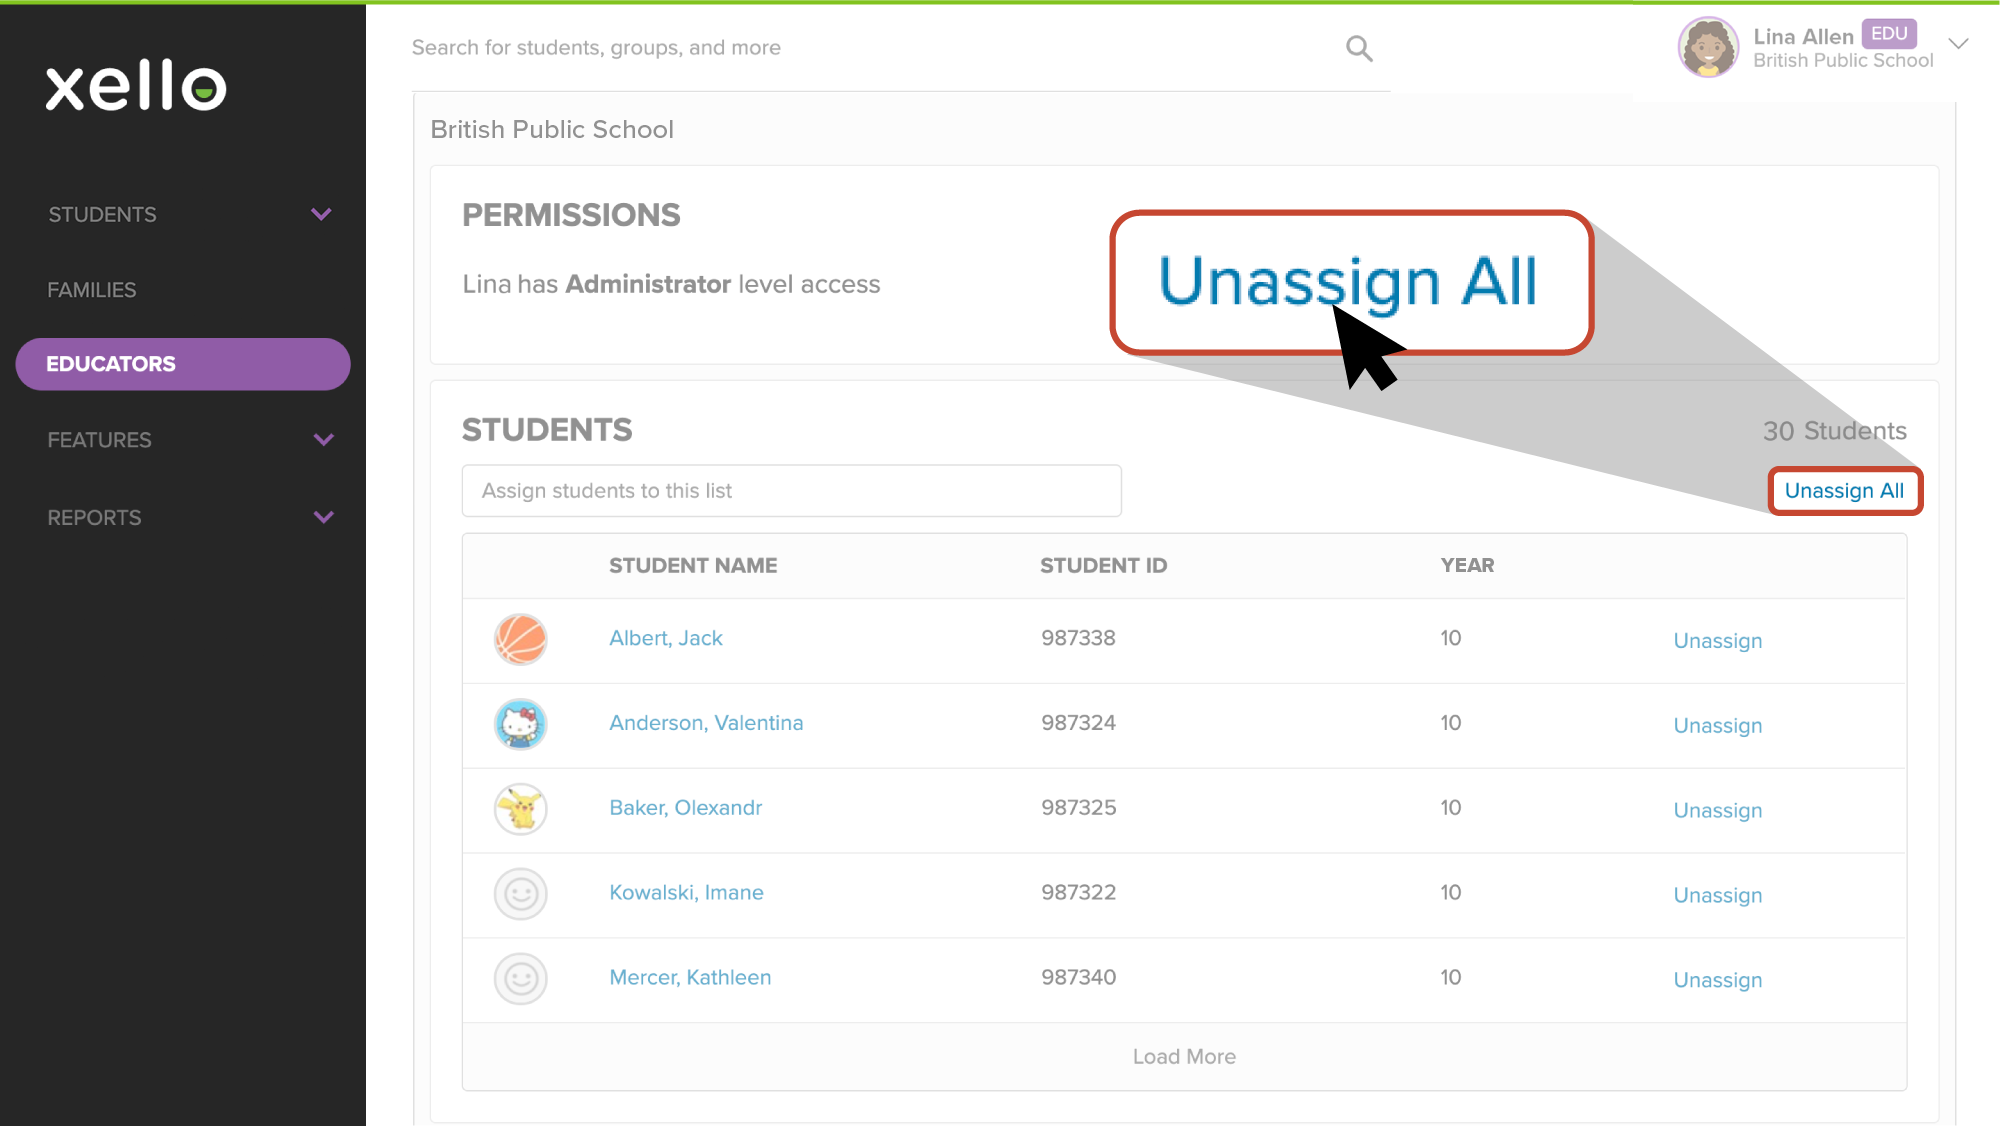 Educator page open. "Unassign All" button highlighted with cursor hovering